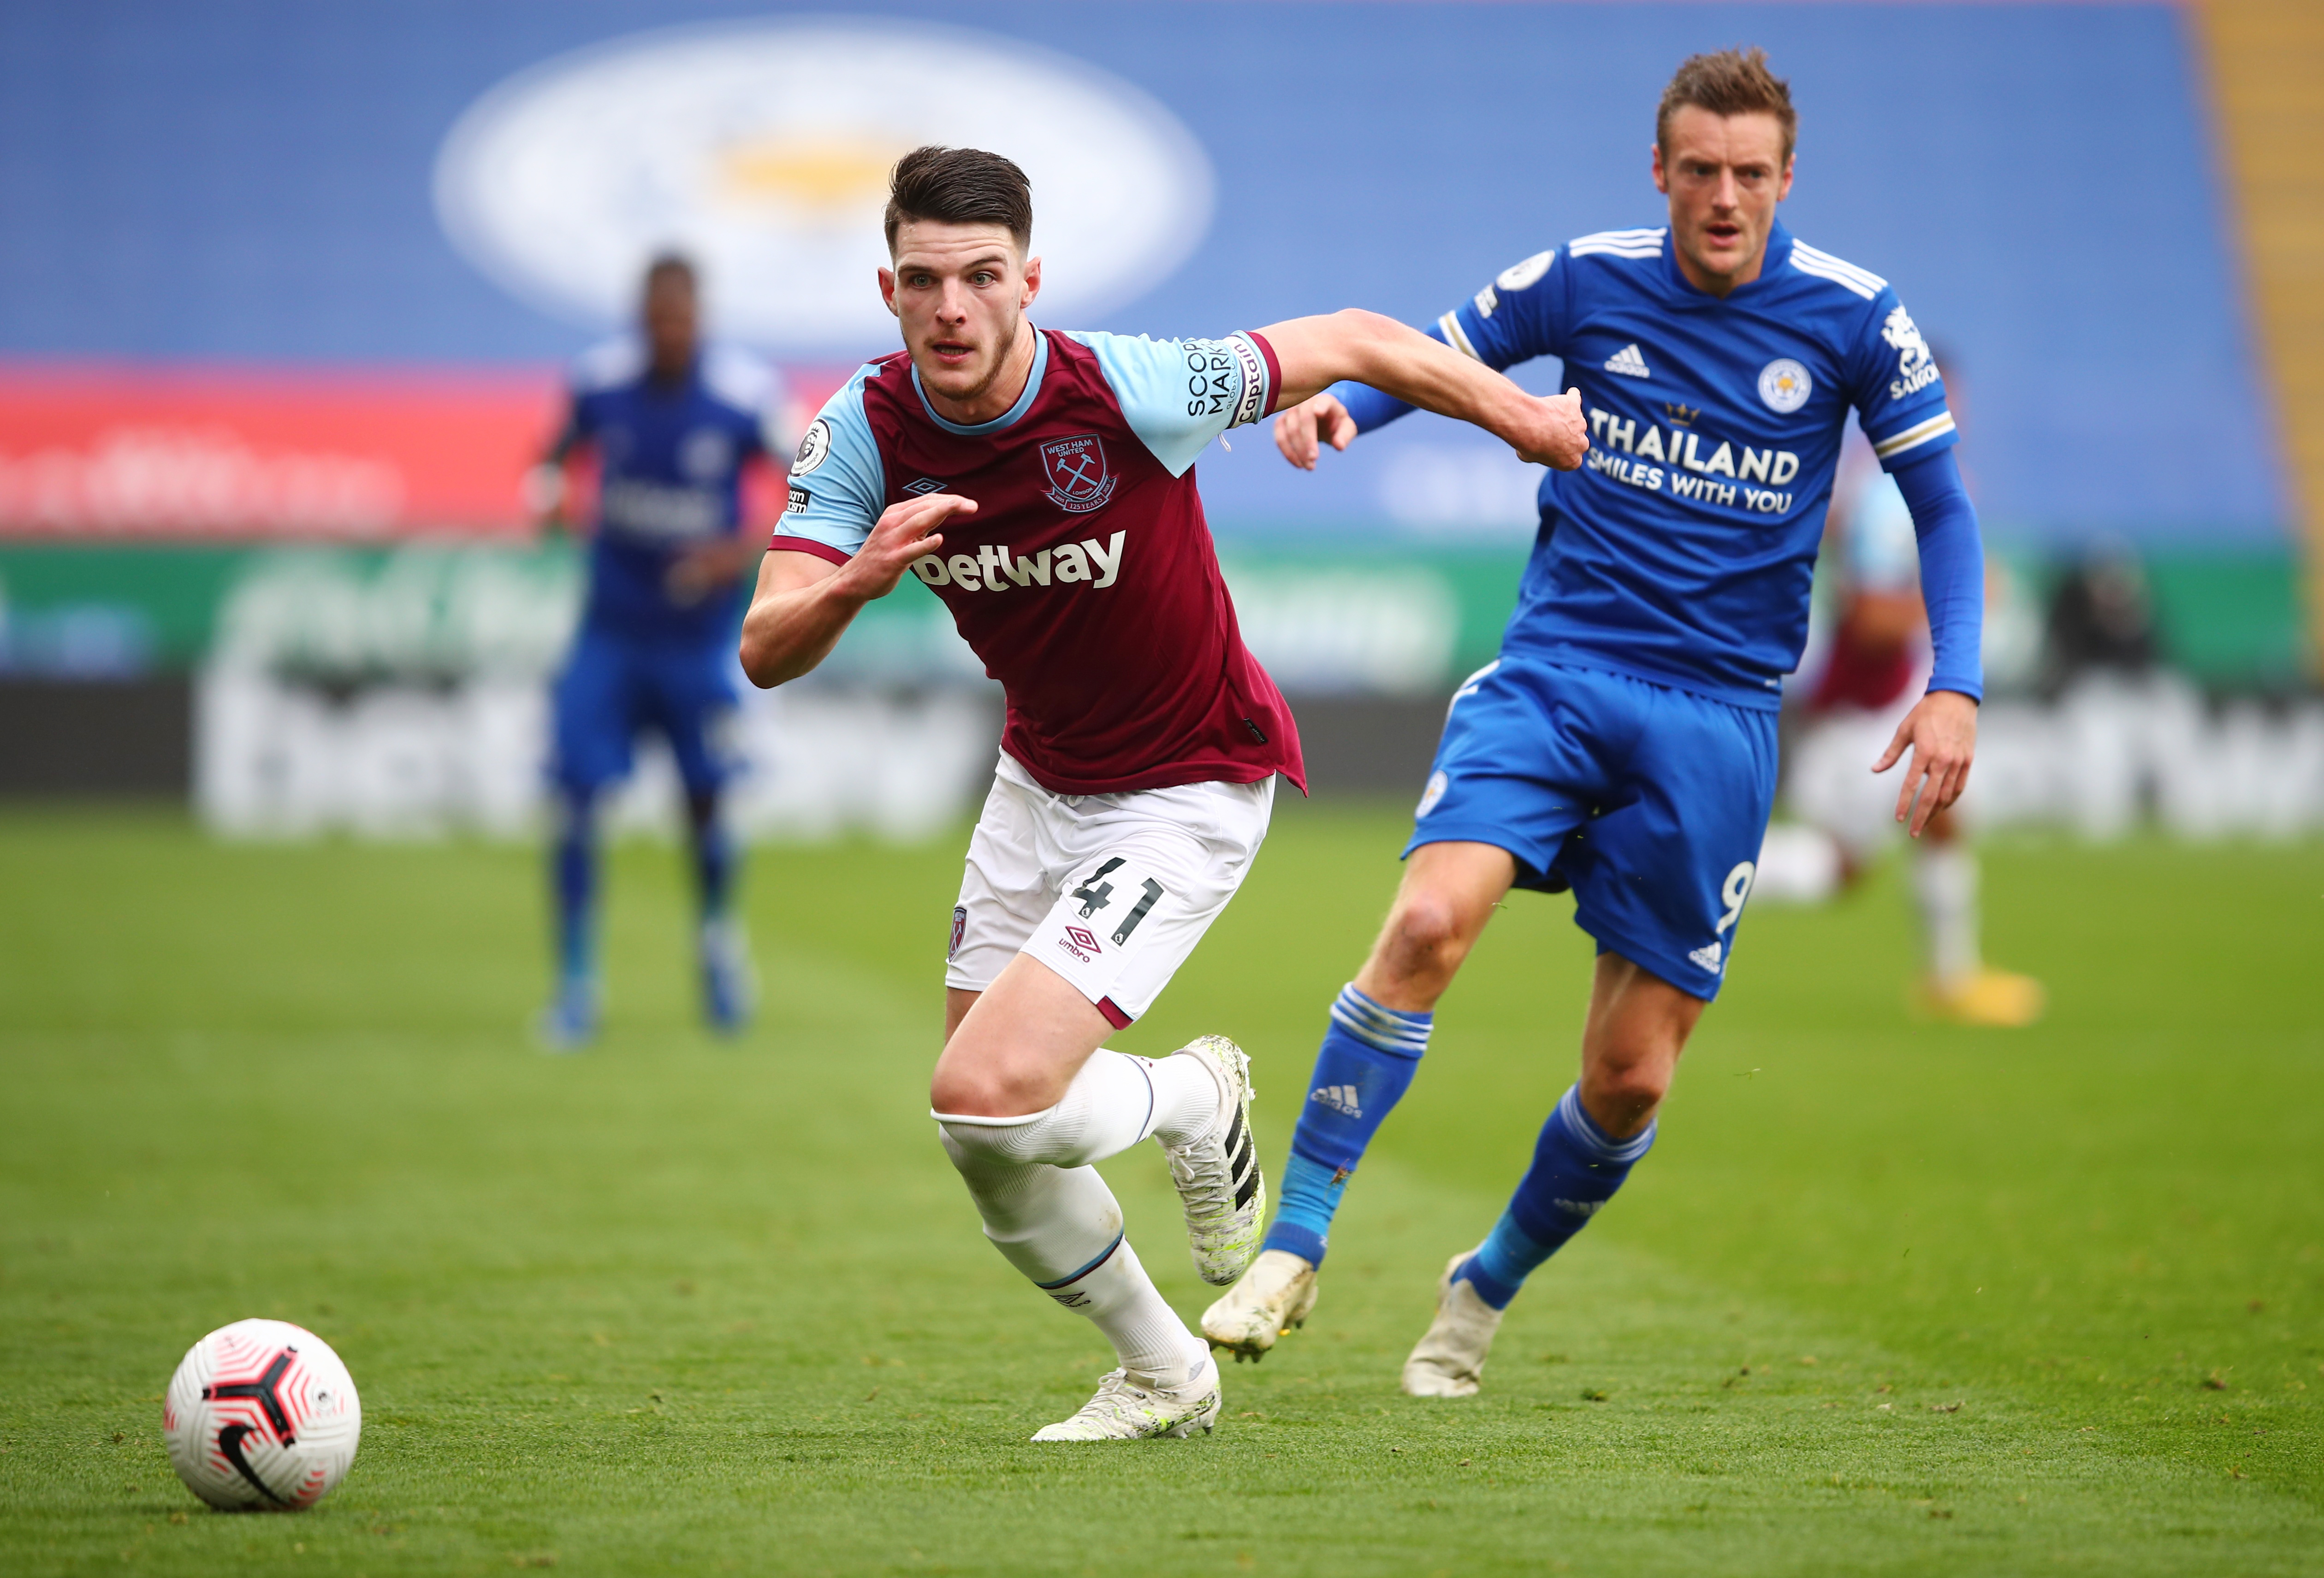 West Ham United's Declan Rice in action with Leicester City's Jamie Vardy. Photo: Reuters